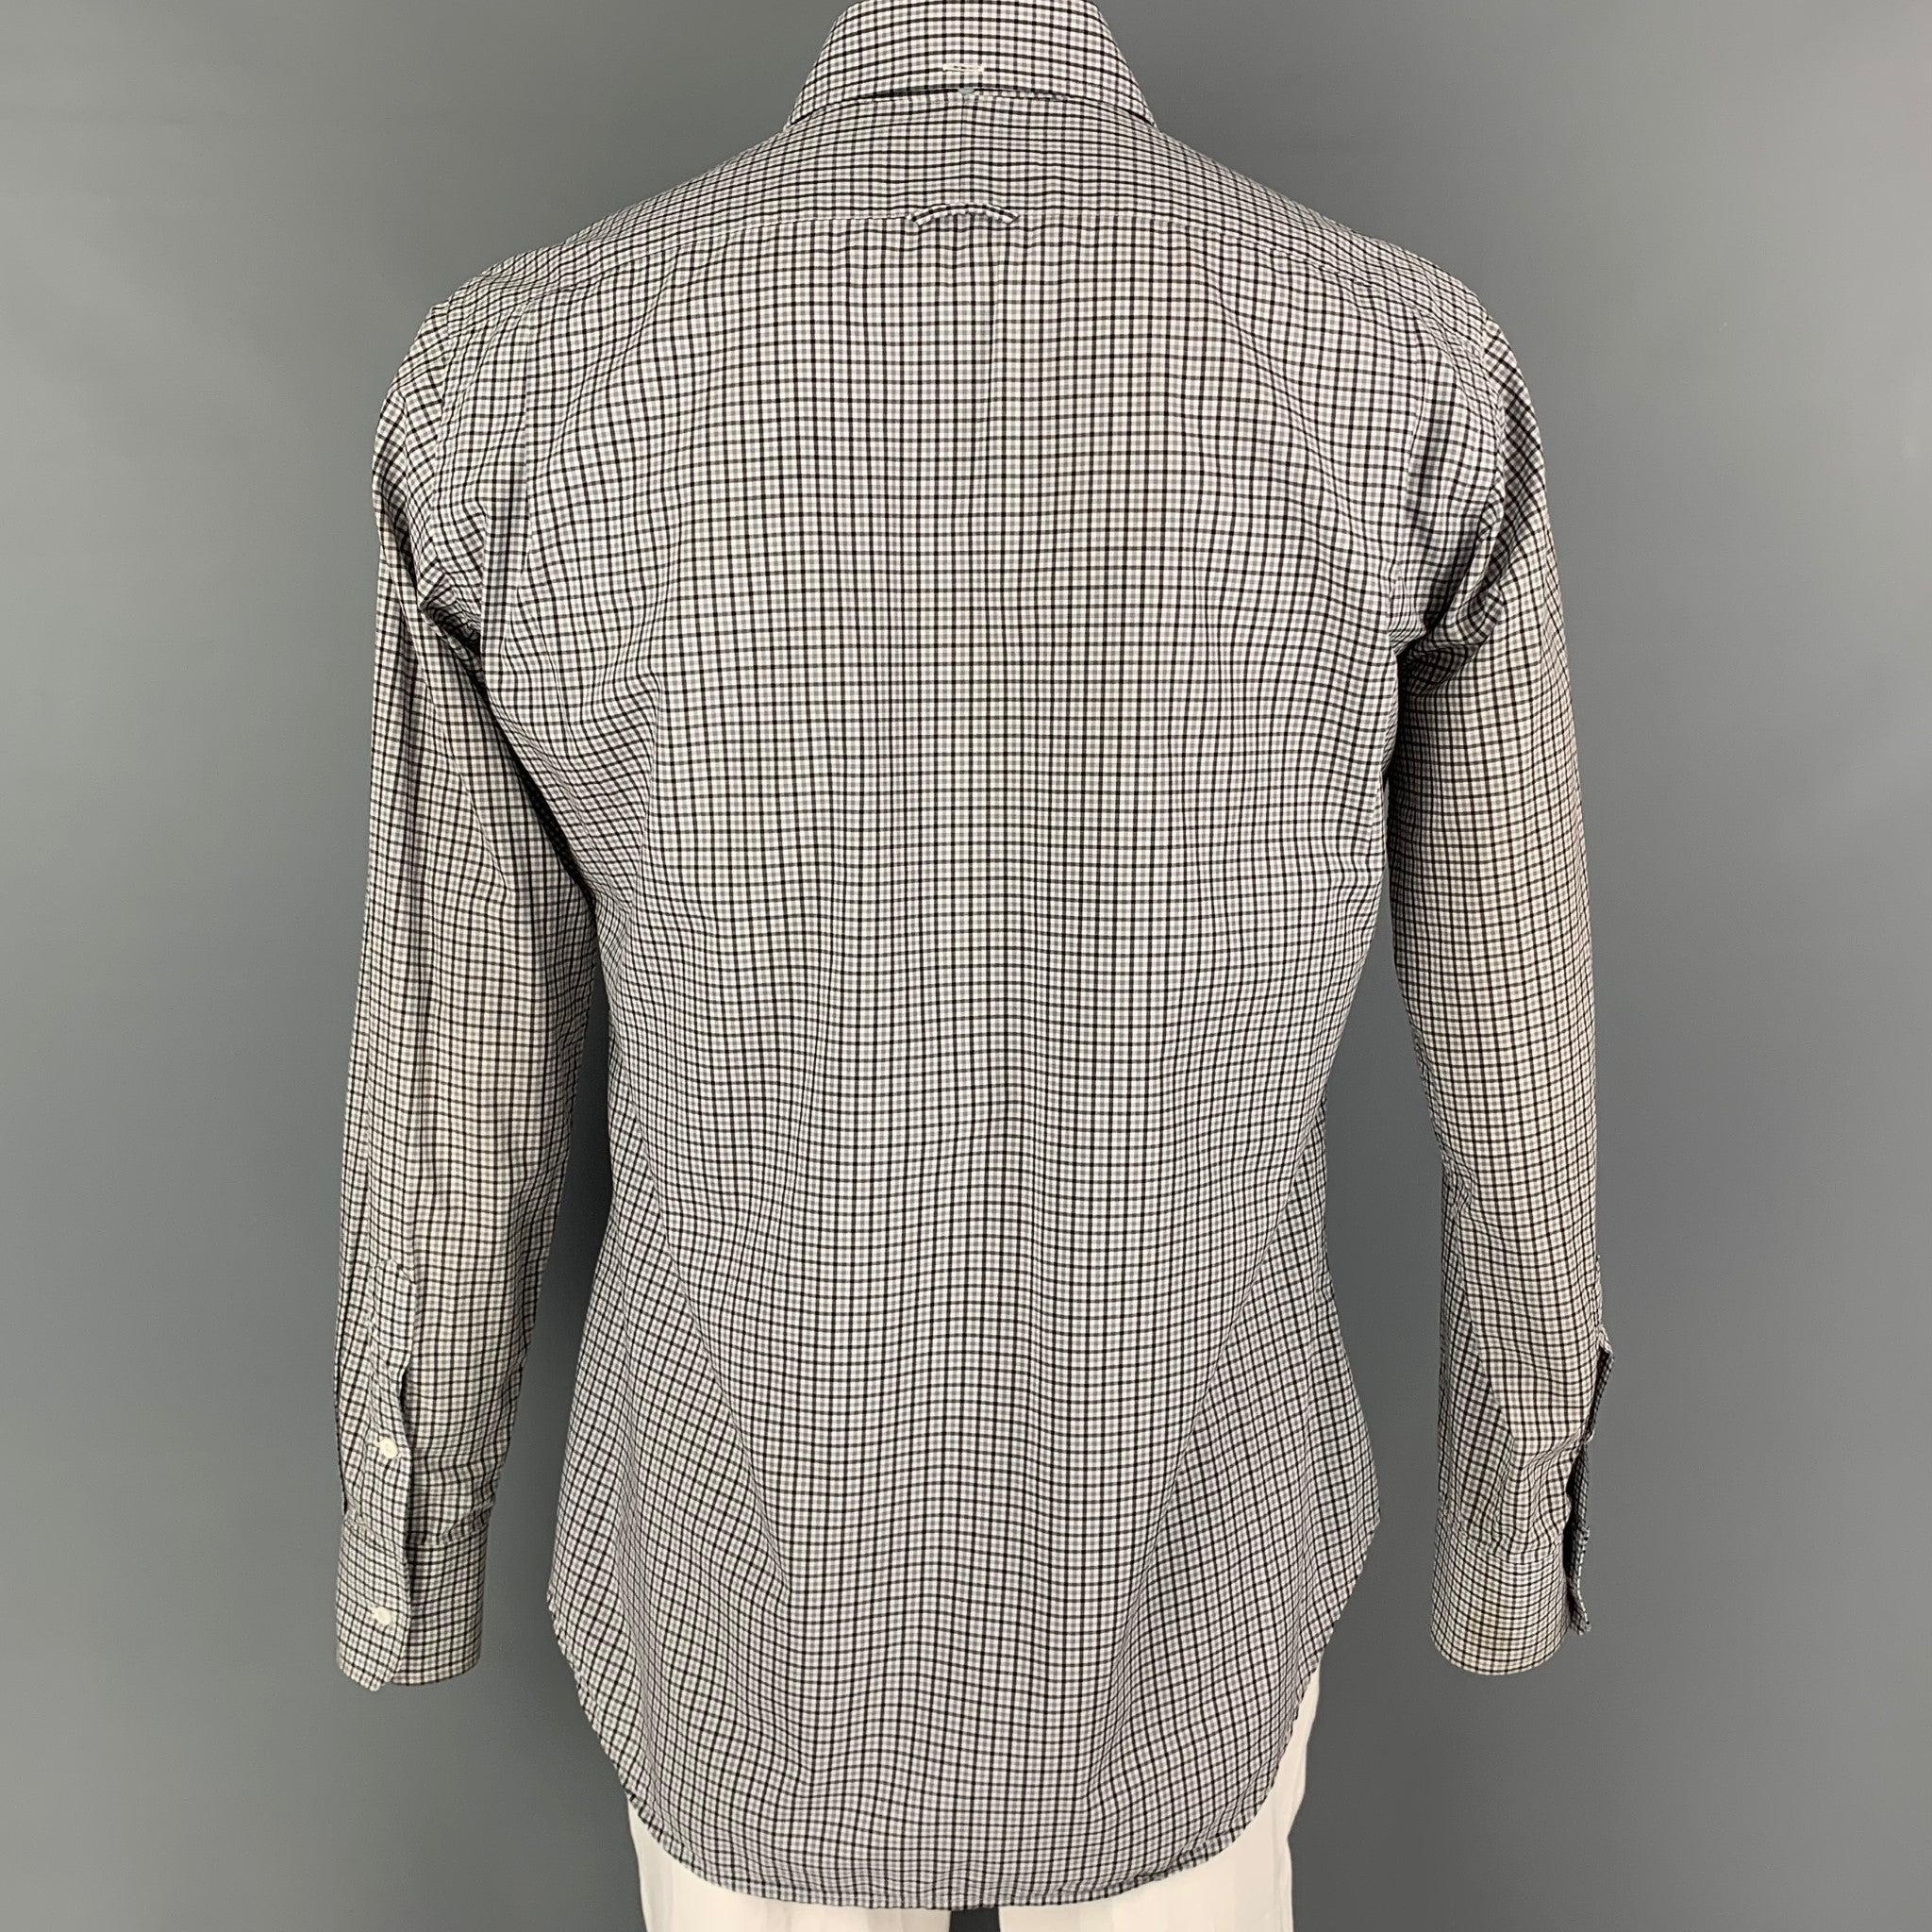 THOM BROWNE Spring 2009 Size L White Black Plaid Cotton Long Sleeve Shirt In Good Condition For Sale In San Francisco, CA